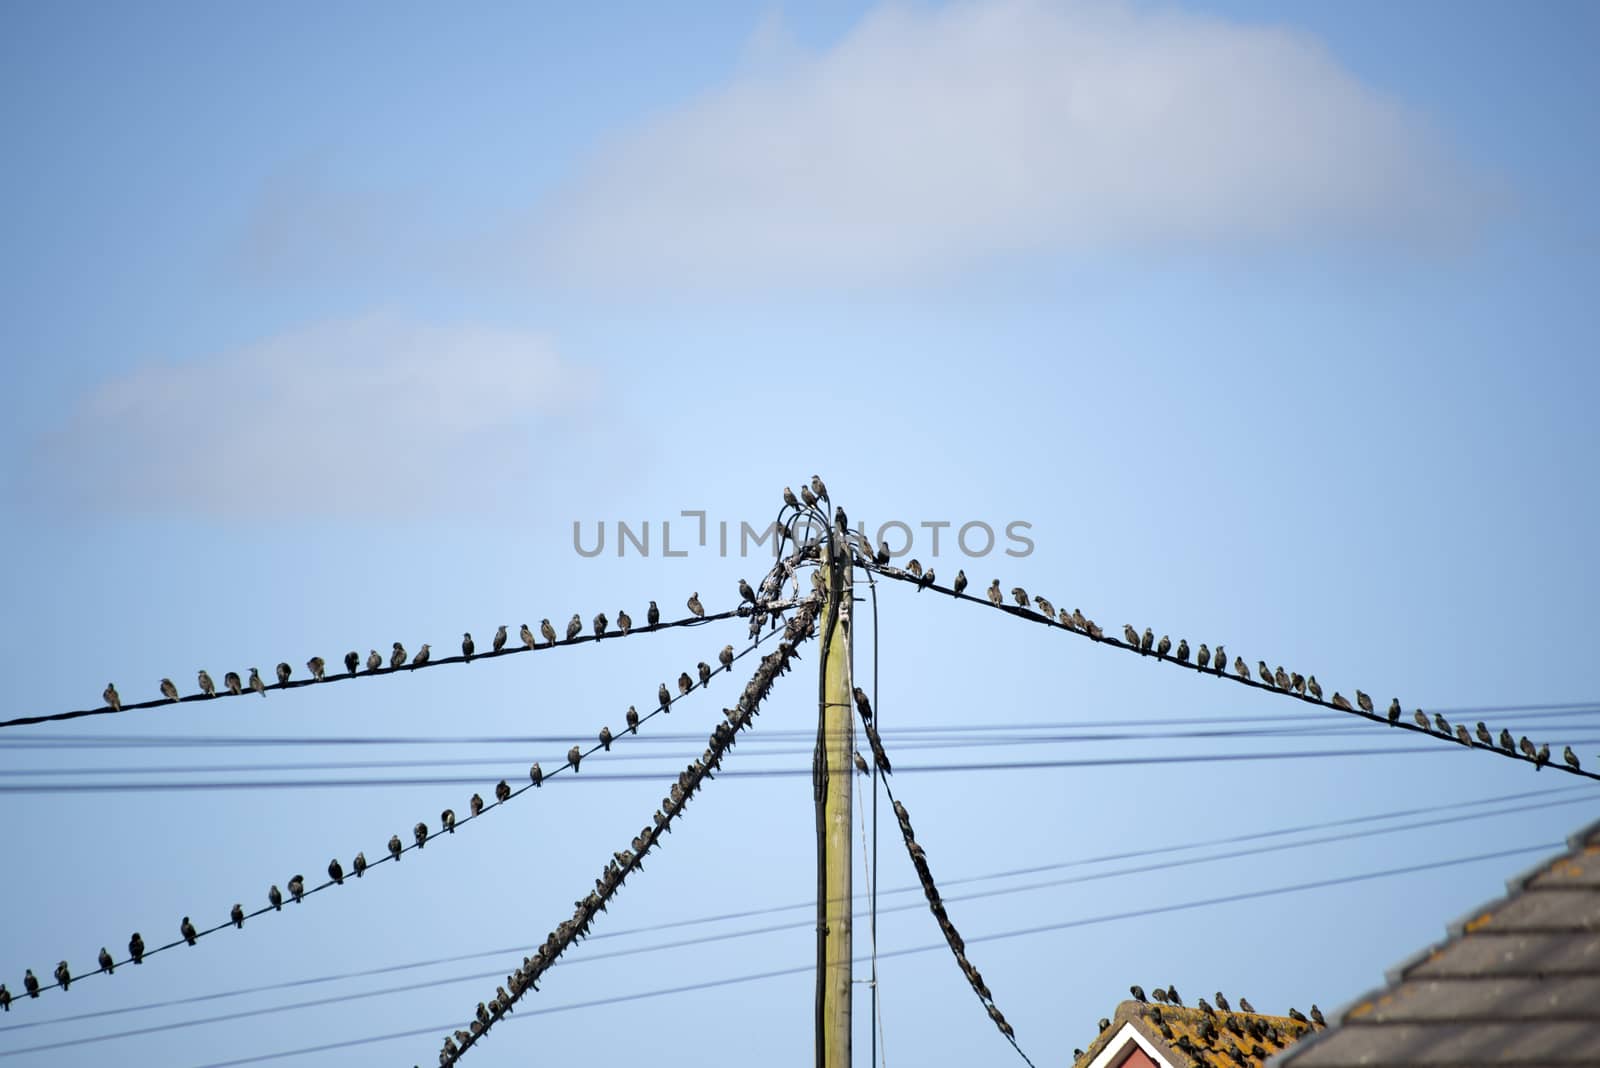 flock of starling birds on the wires and roofs by morrbyte